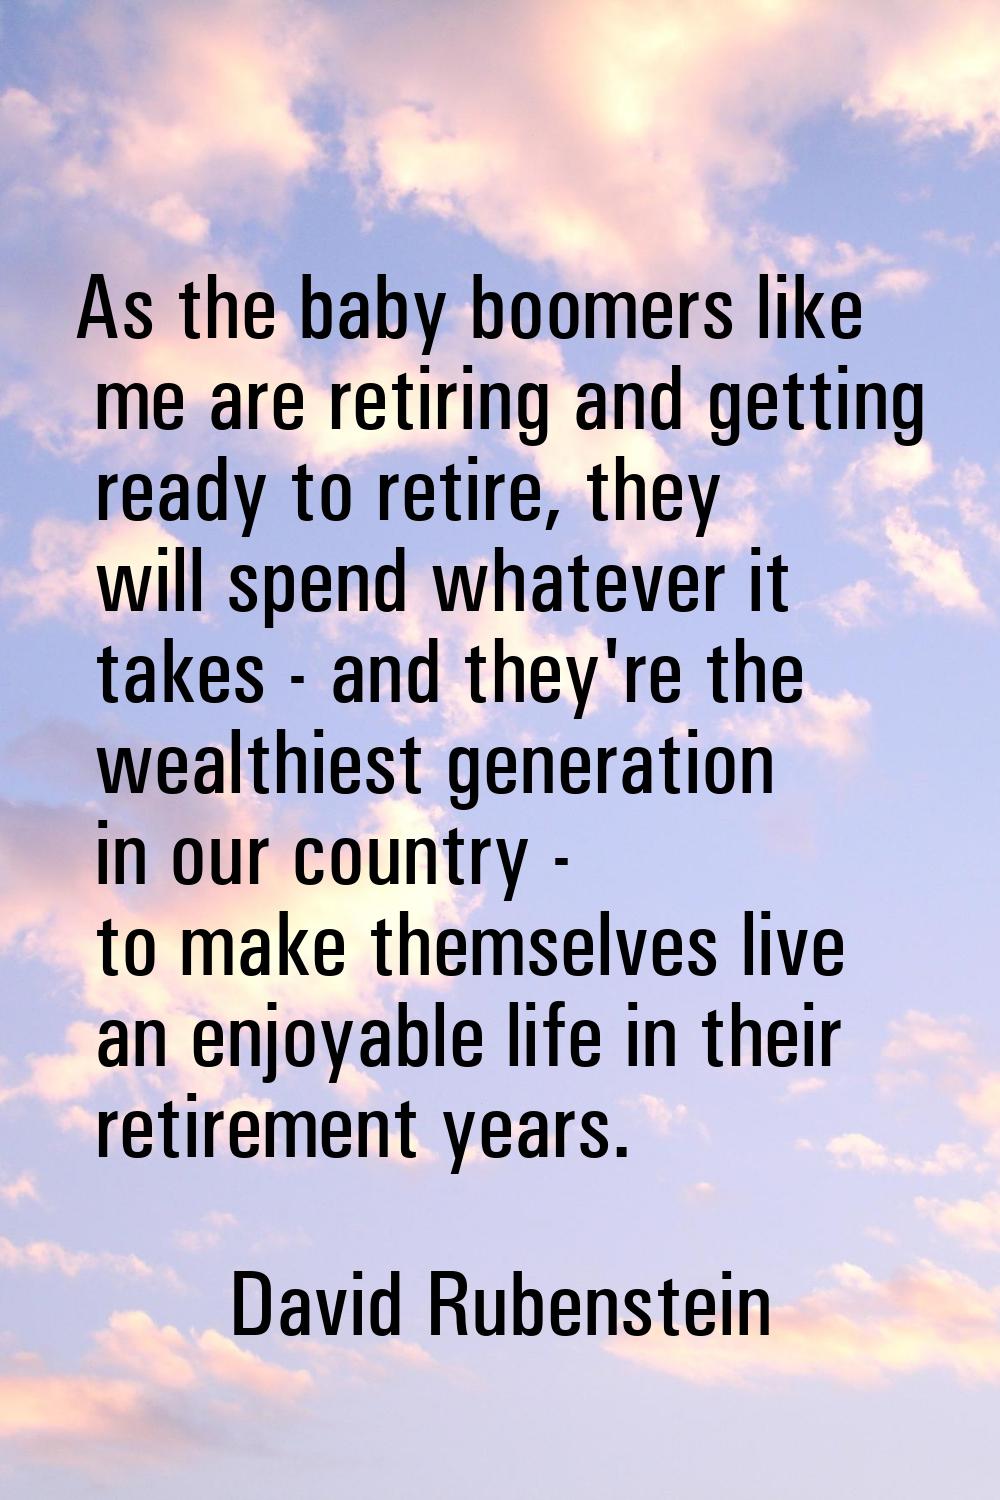 As the baby boomers like me are retiring and getting ready to retire, they will spend whatever it t